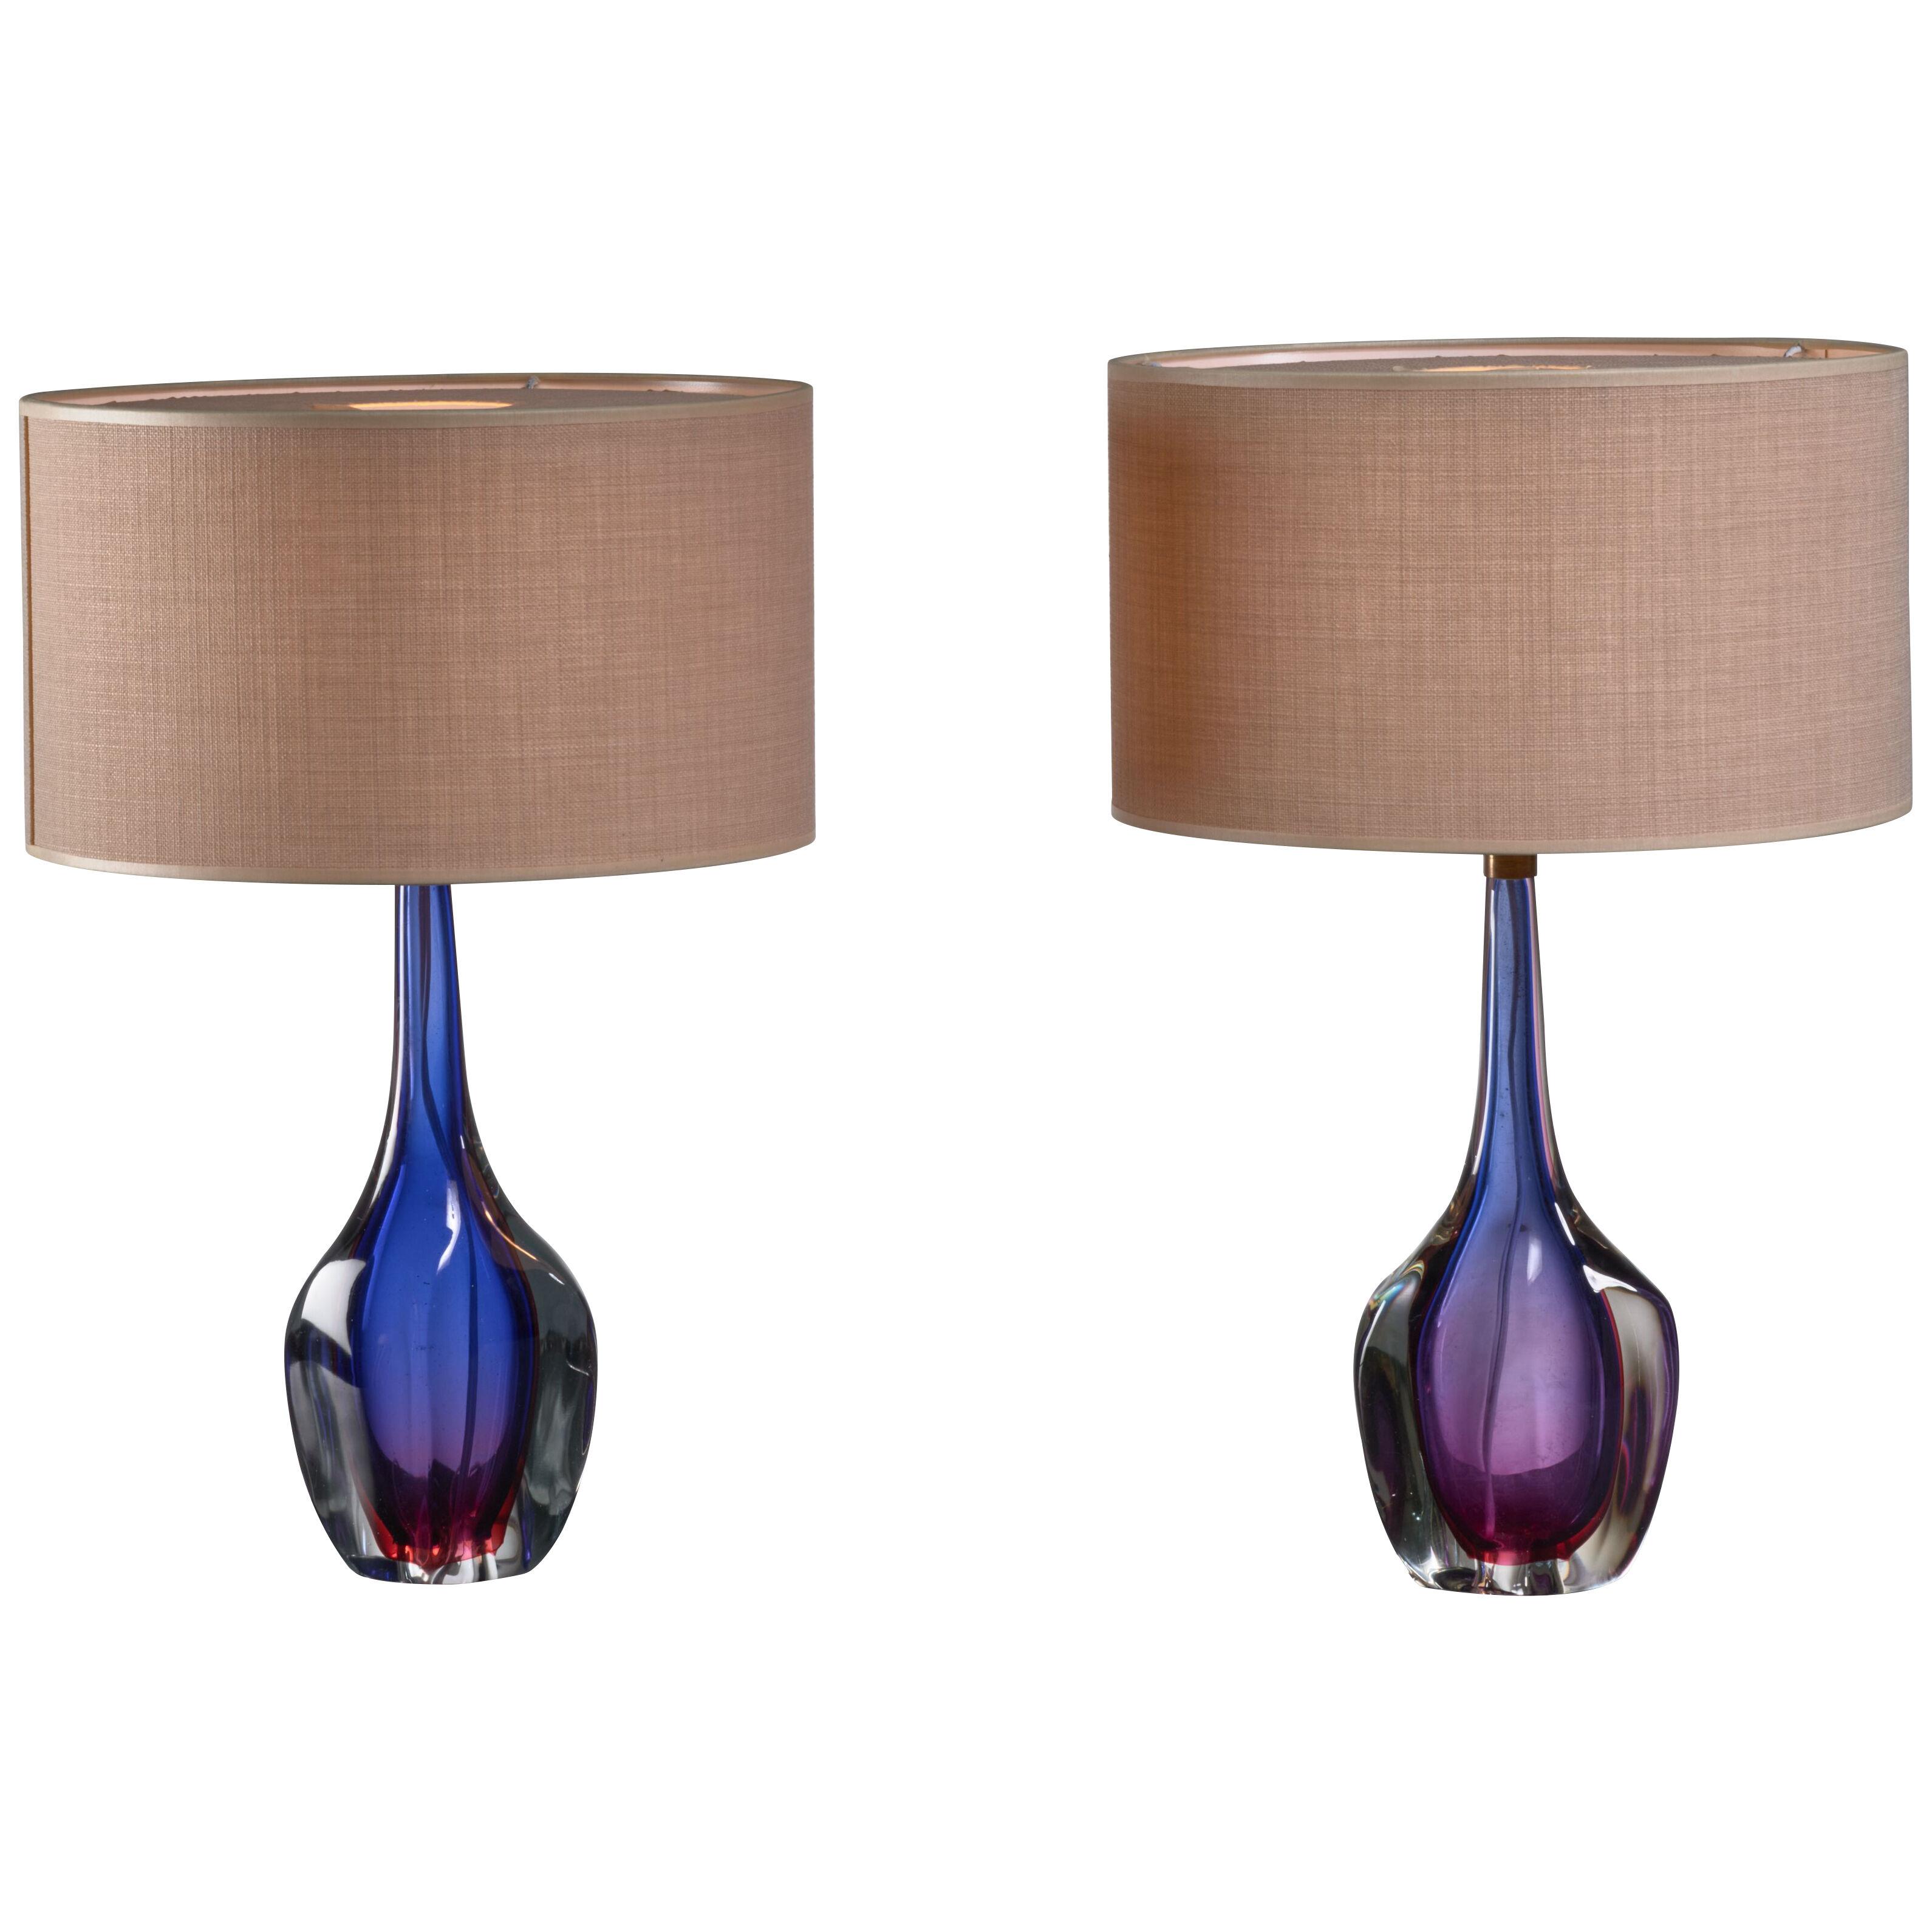 Pair of Purple and Blue Arte Nuova Murano Glass Table Lamps, Italy, 1950s